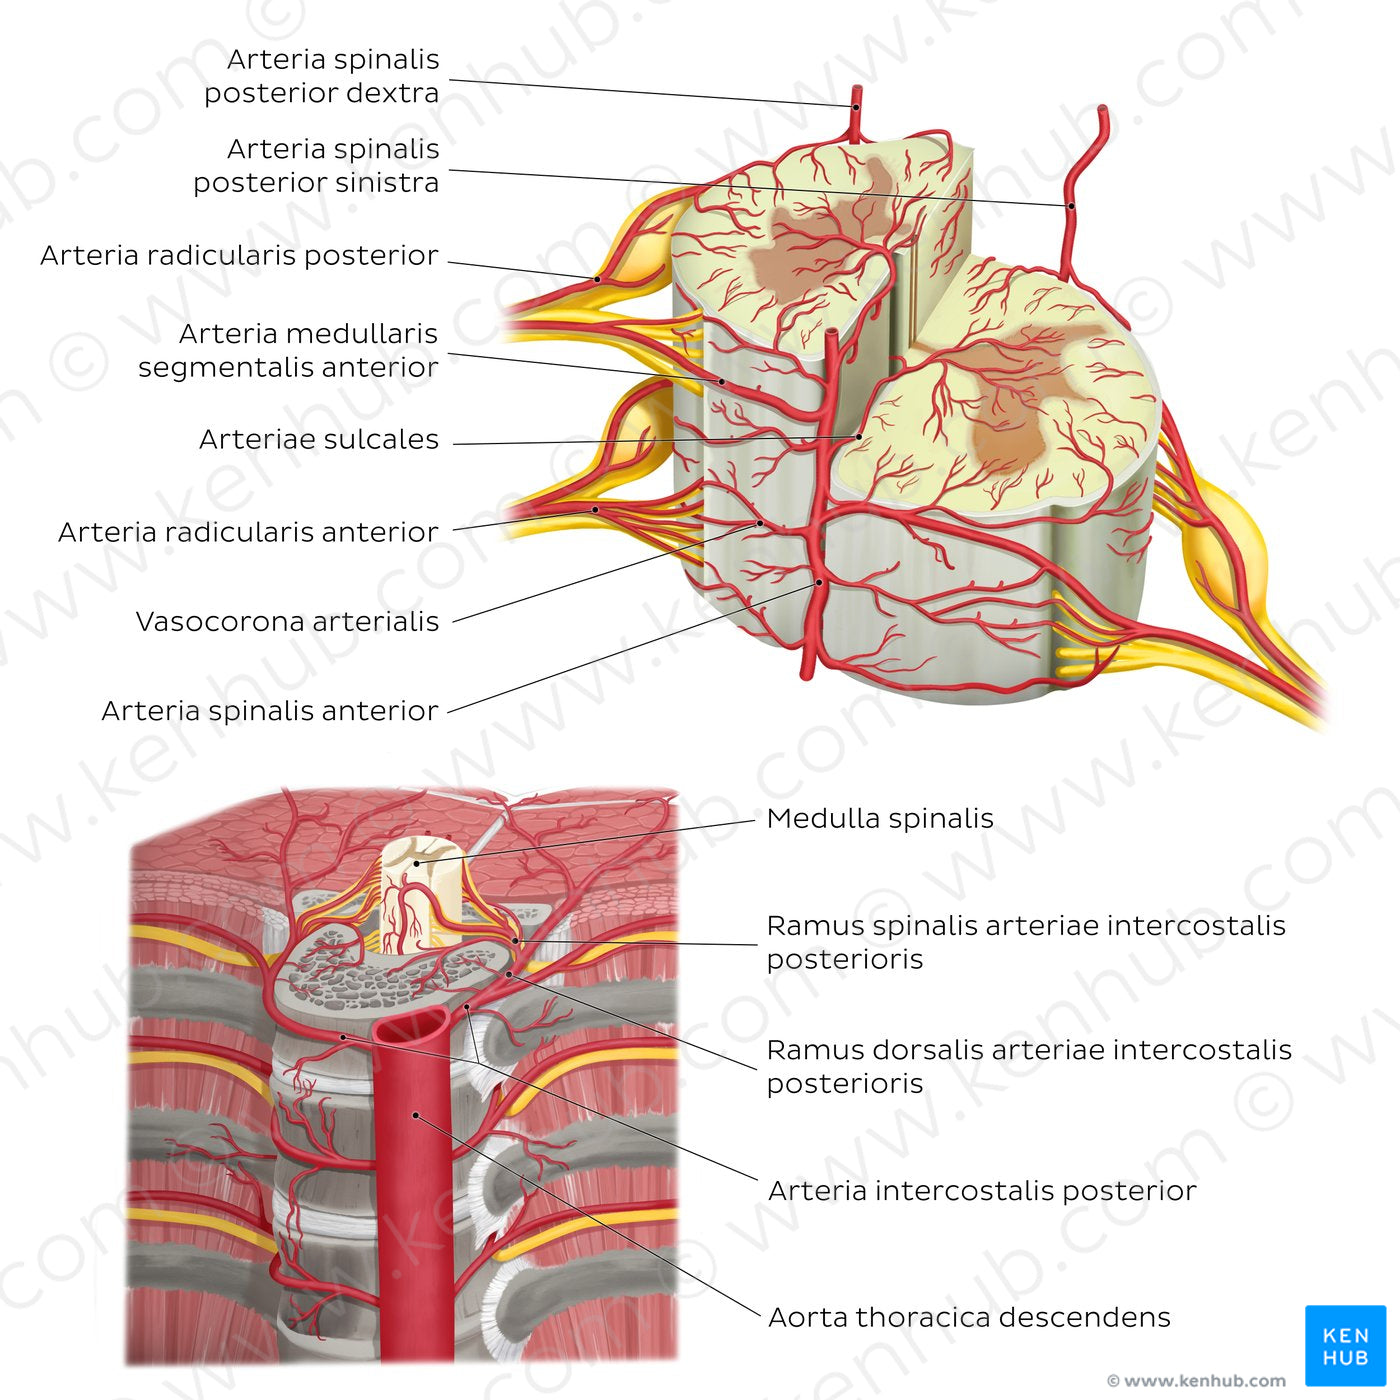 Arteries of the spinal cord (Latin)